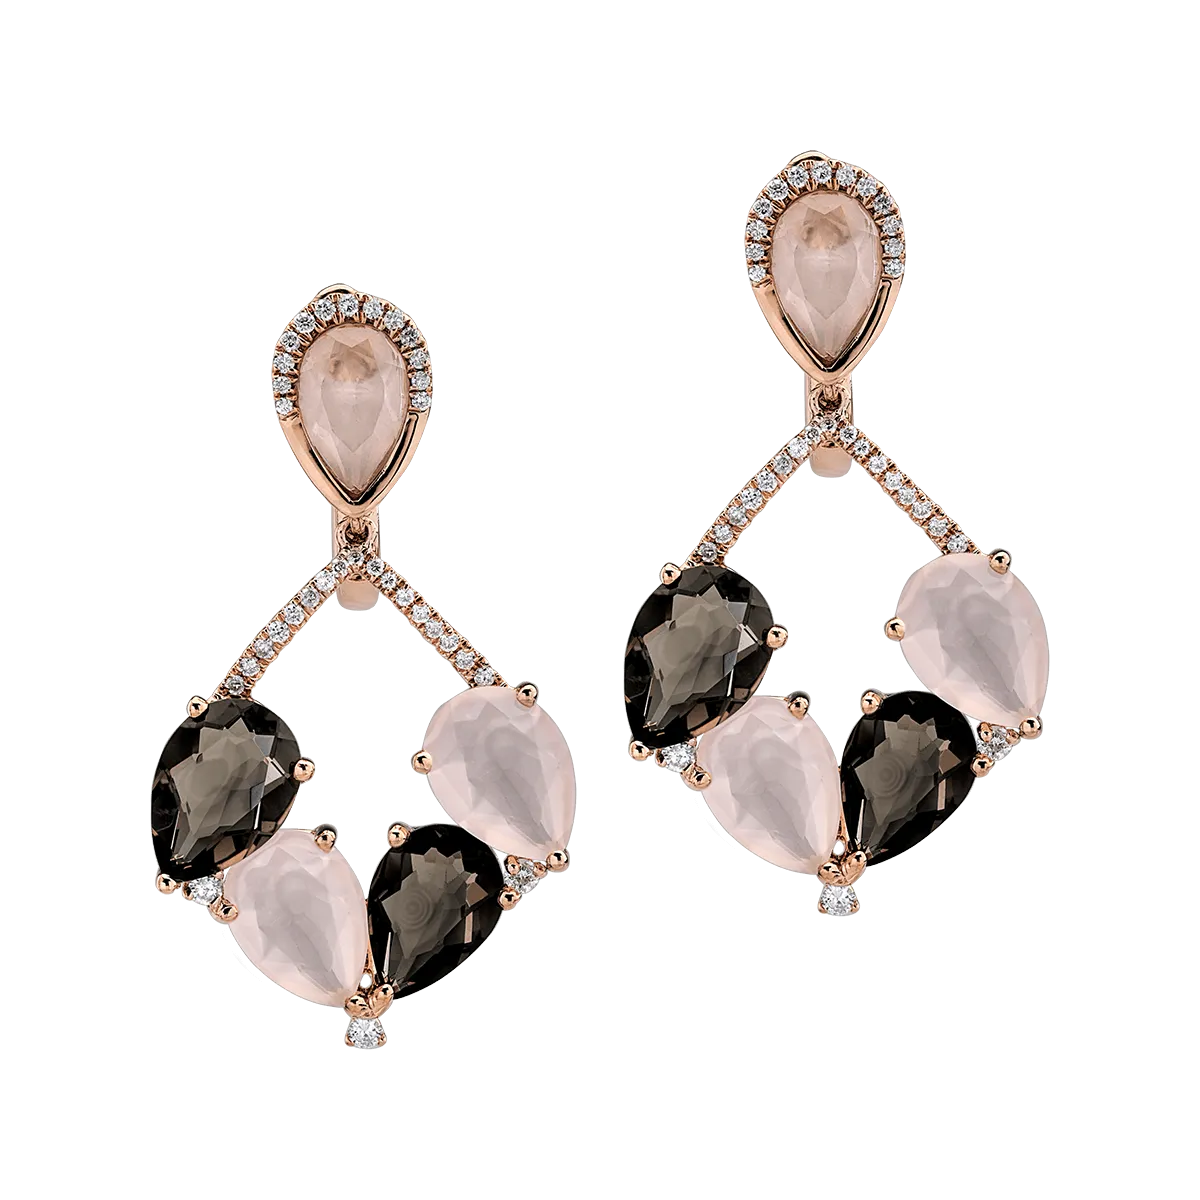 18K rose gold earrings with 0.314ct diamonds and 9.94ct quartz